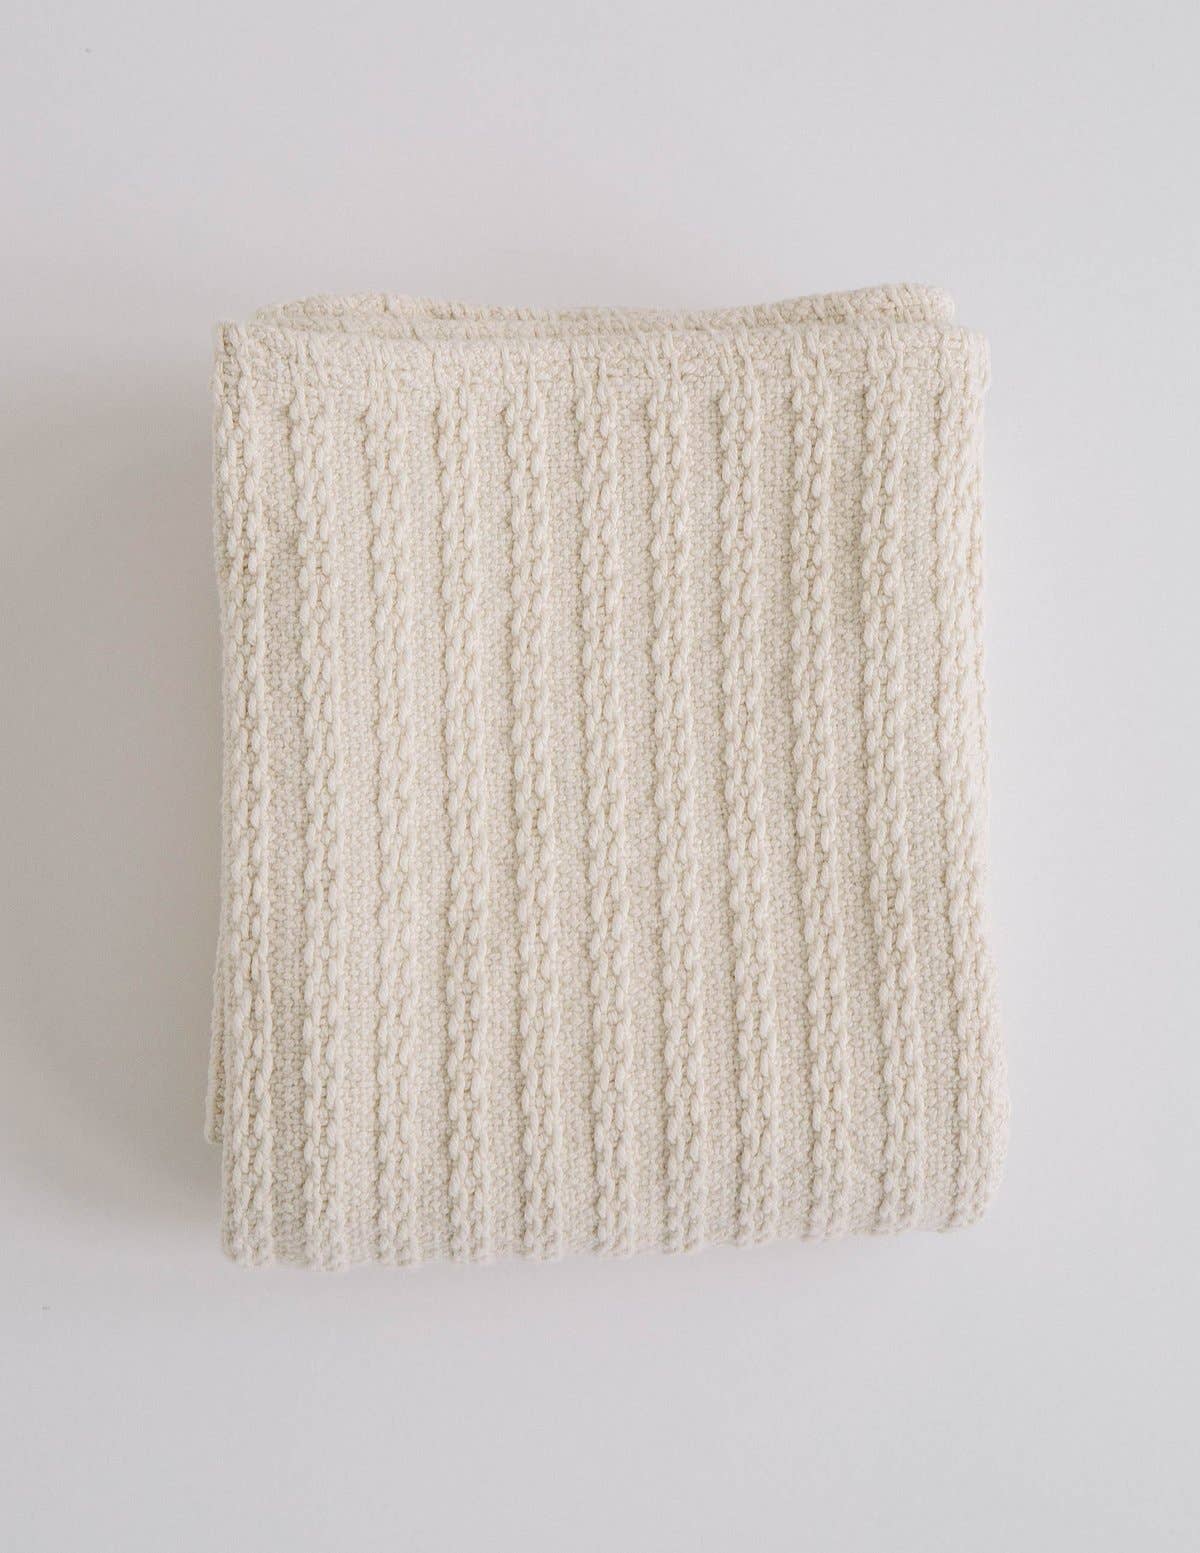 cable knit baby blanket in natural color